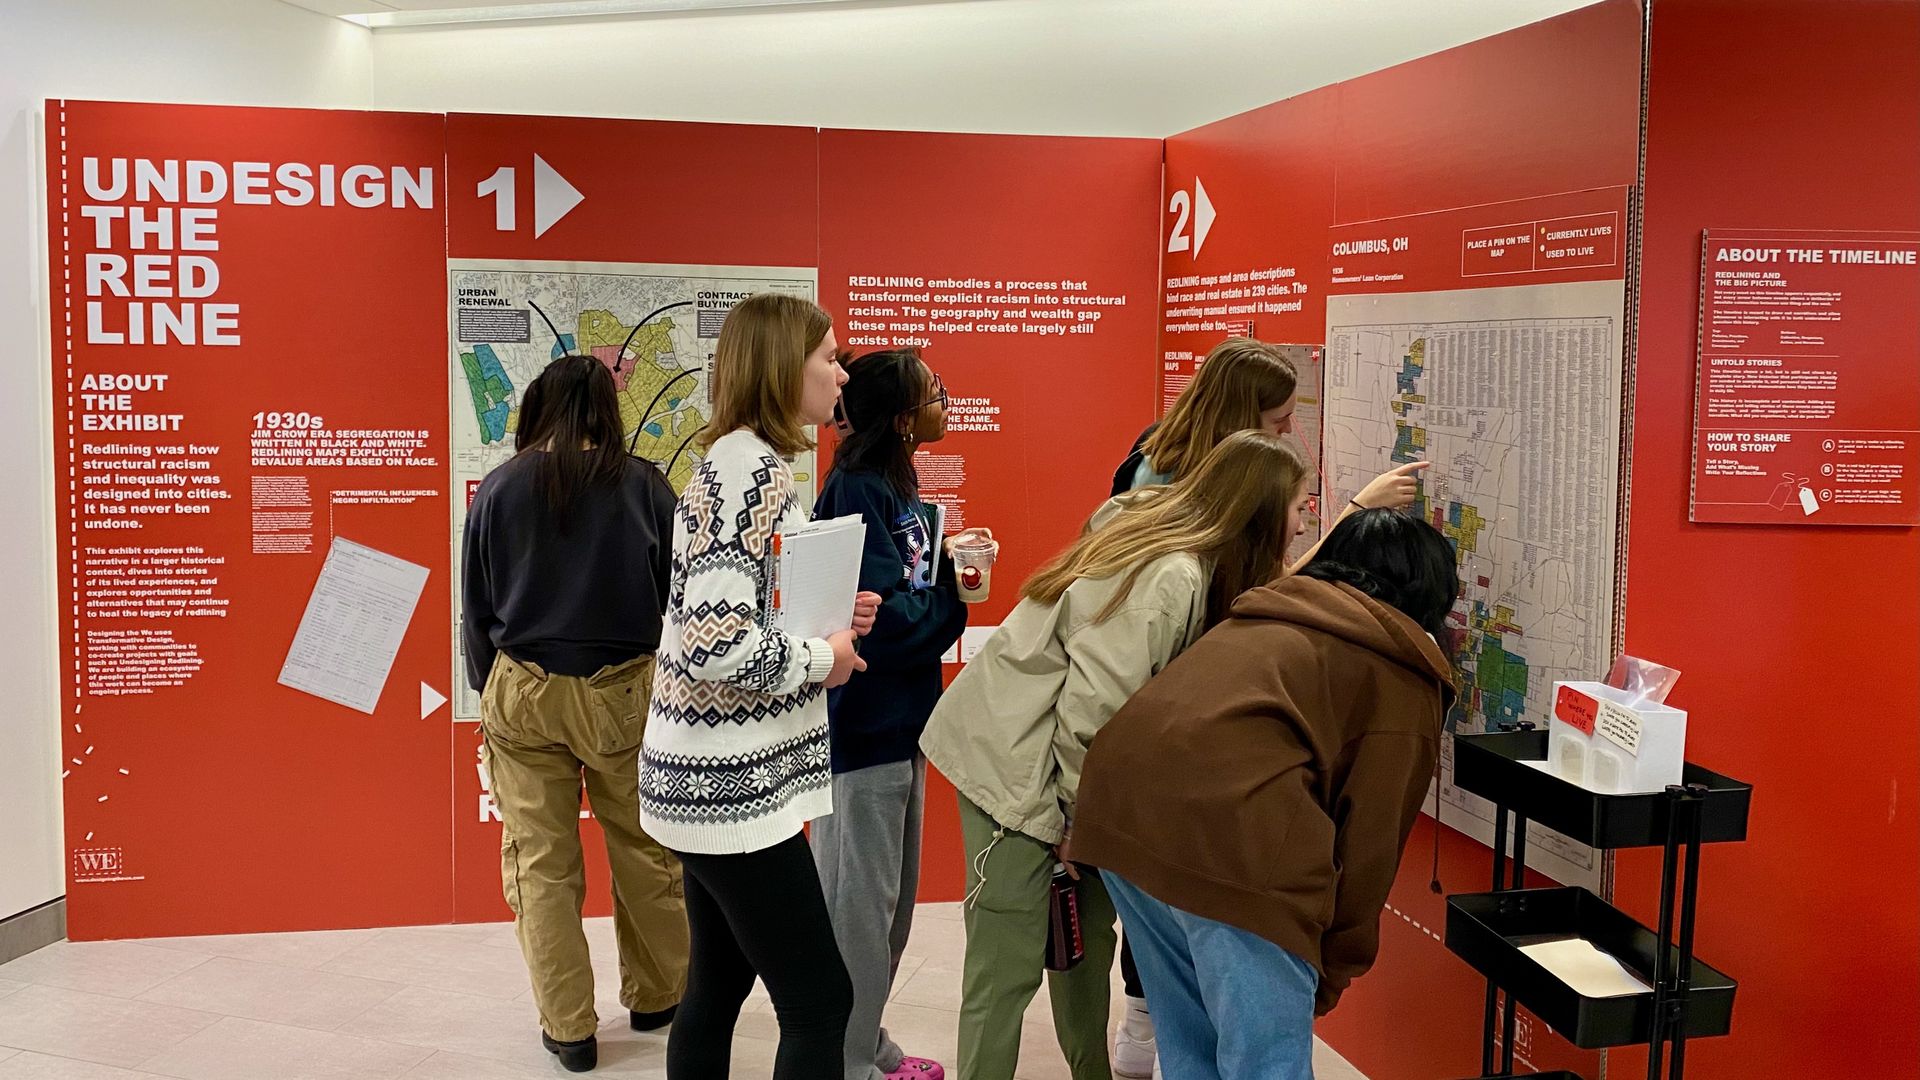 Students point on a map on a red display that reads "Undesign the Redline"